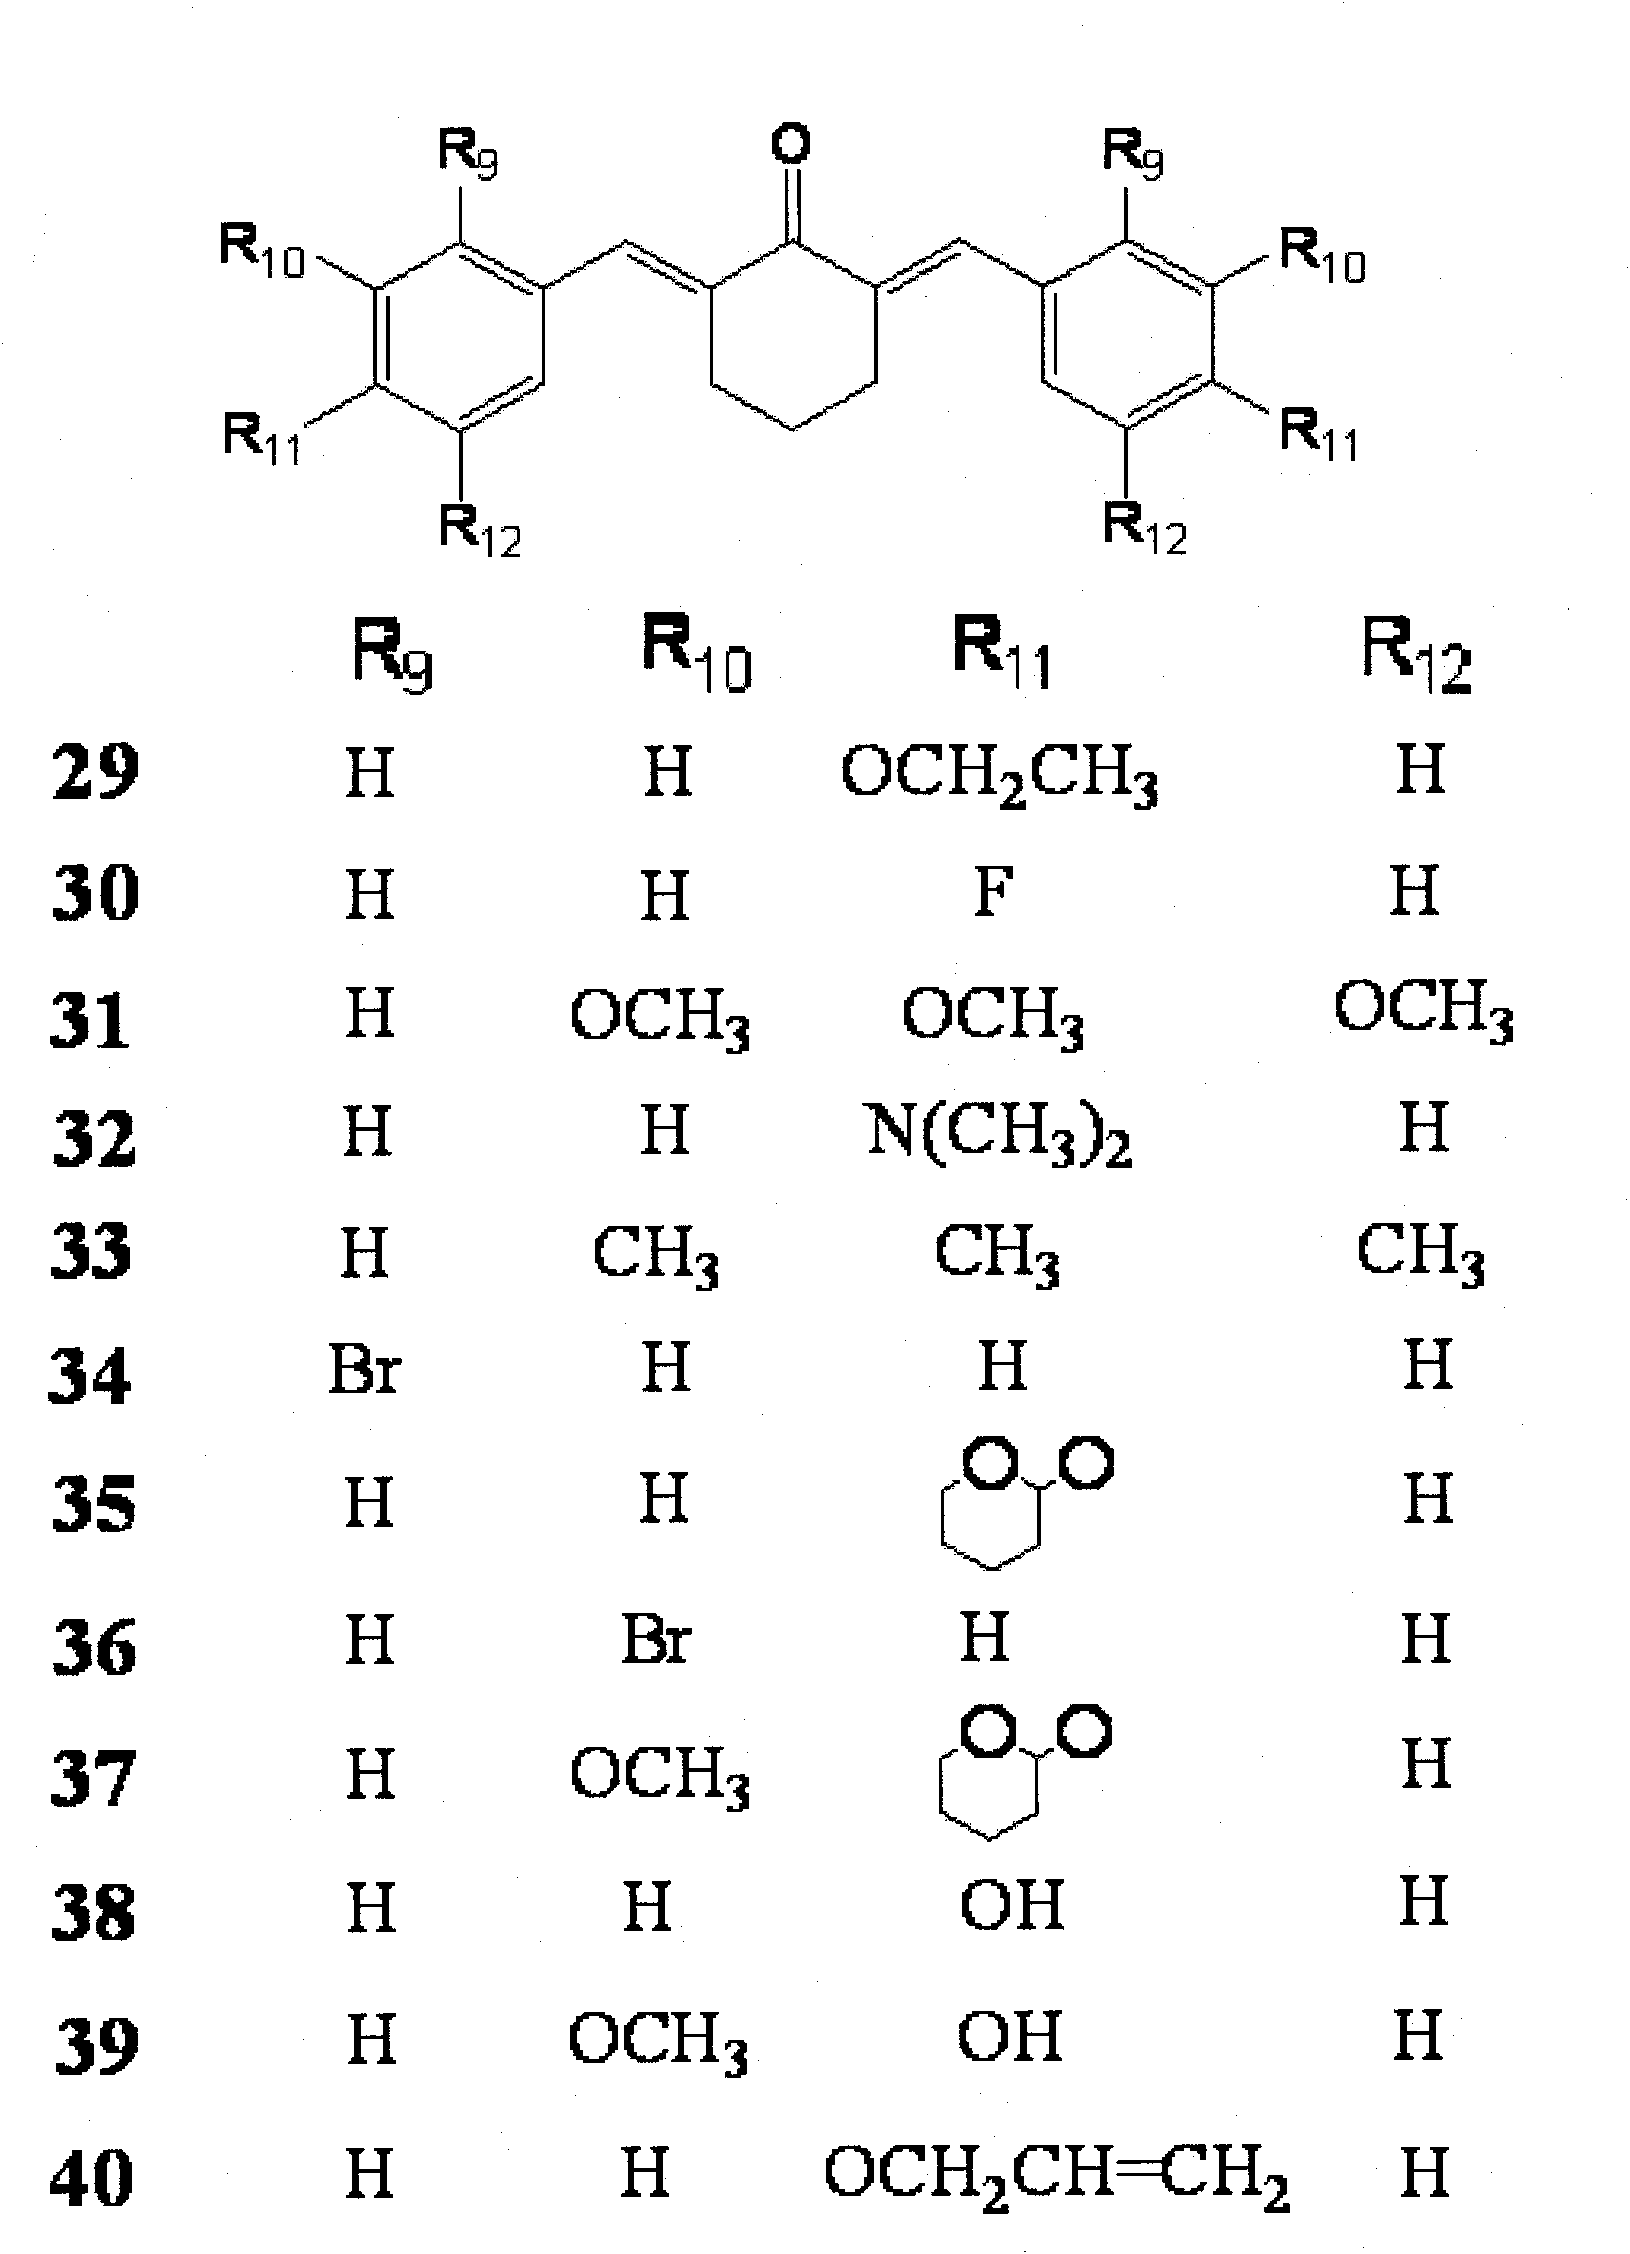 Cyclopentanone-containing curcumin monocarbonyl structural analogues and application thereof